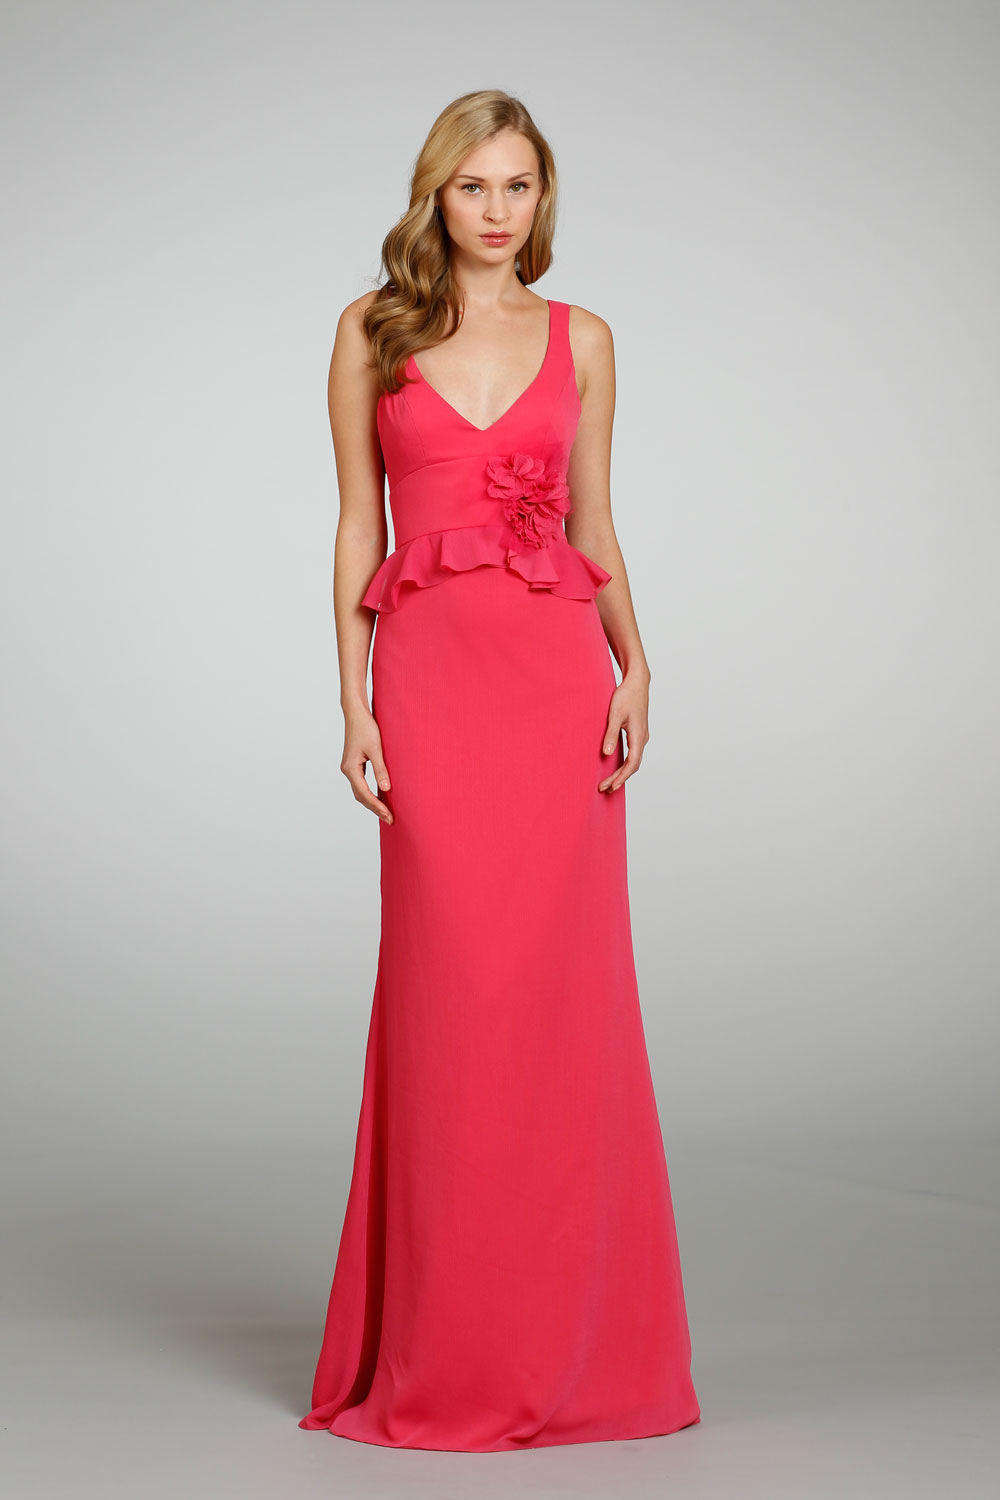 Jim Hjelm Occasions Trunk Show | JLM Couture